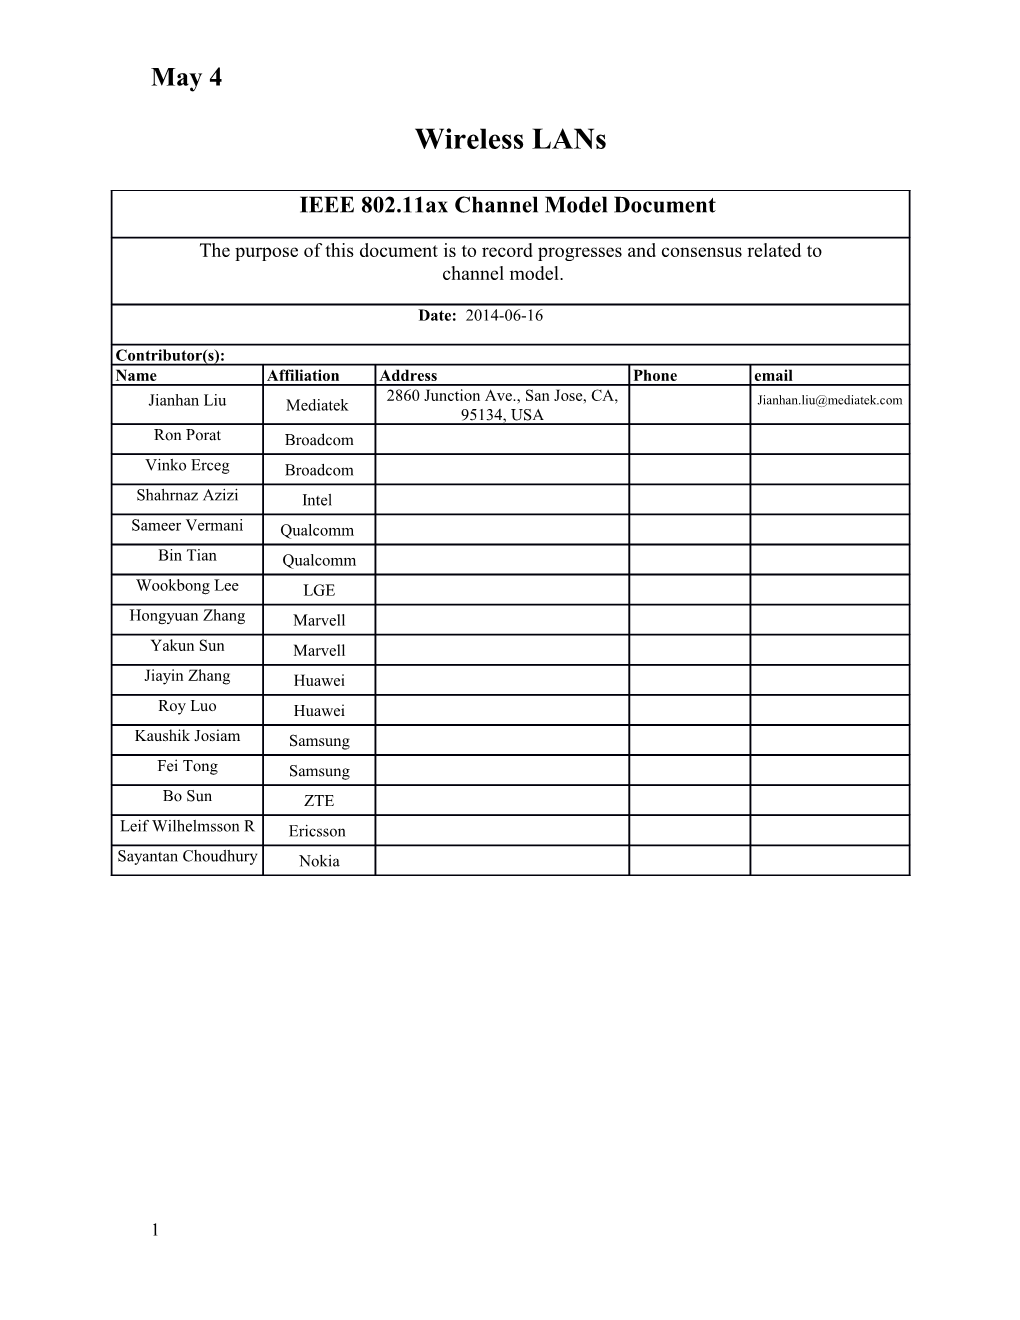 This Document Provides the Channel Model Document to Be Used for IEEE802.11Ax Task Group